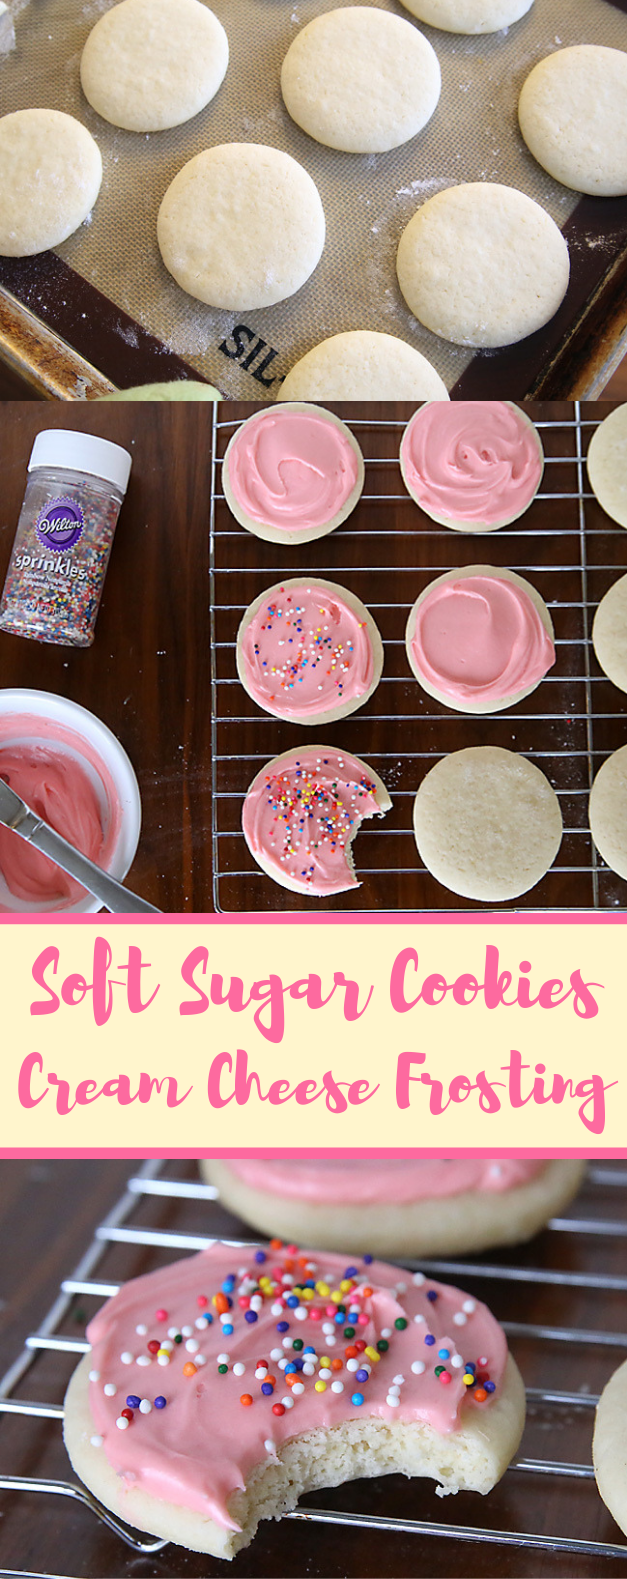 THE VERY BEST SOFT SUGAR COOKIE + CREAM CHEESE FROSTING RECIPE #dessert #christmas